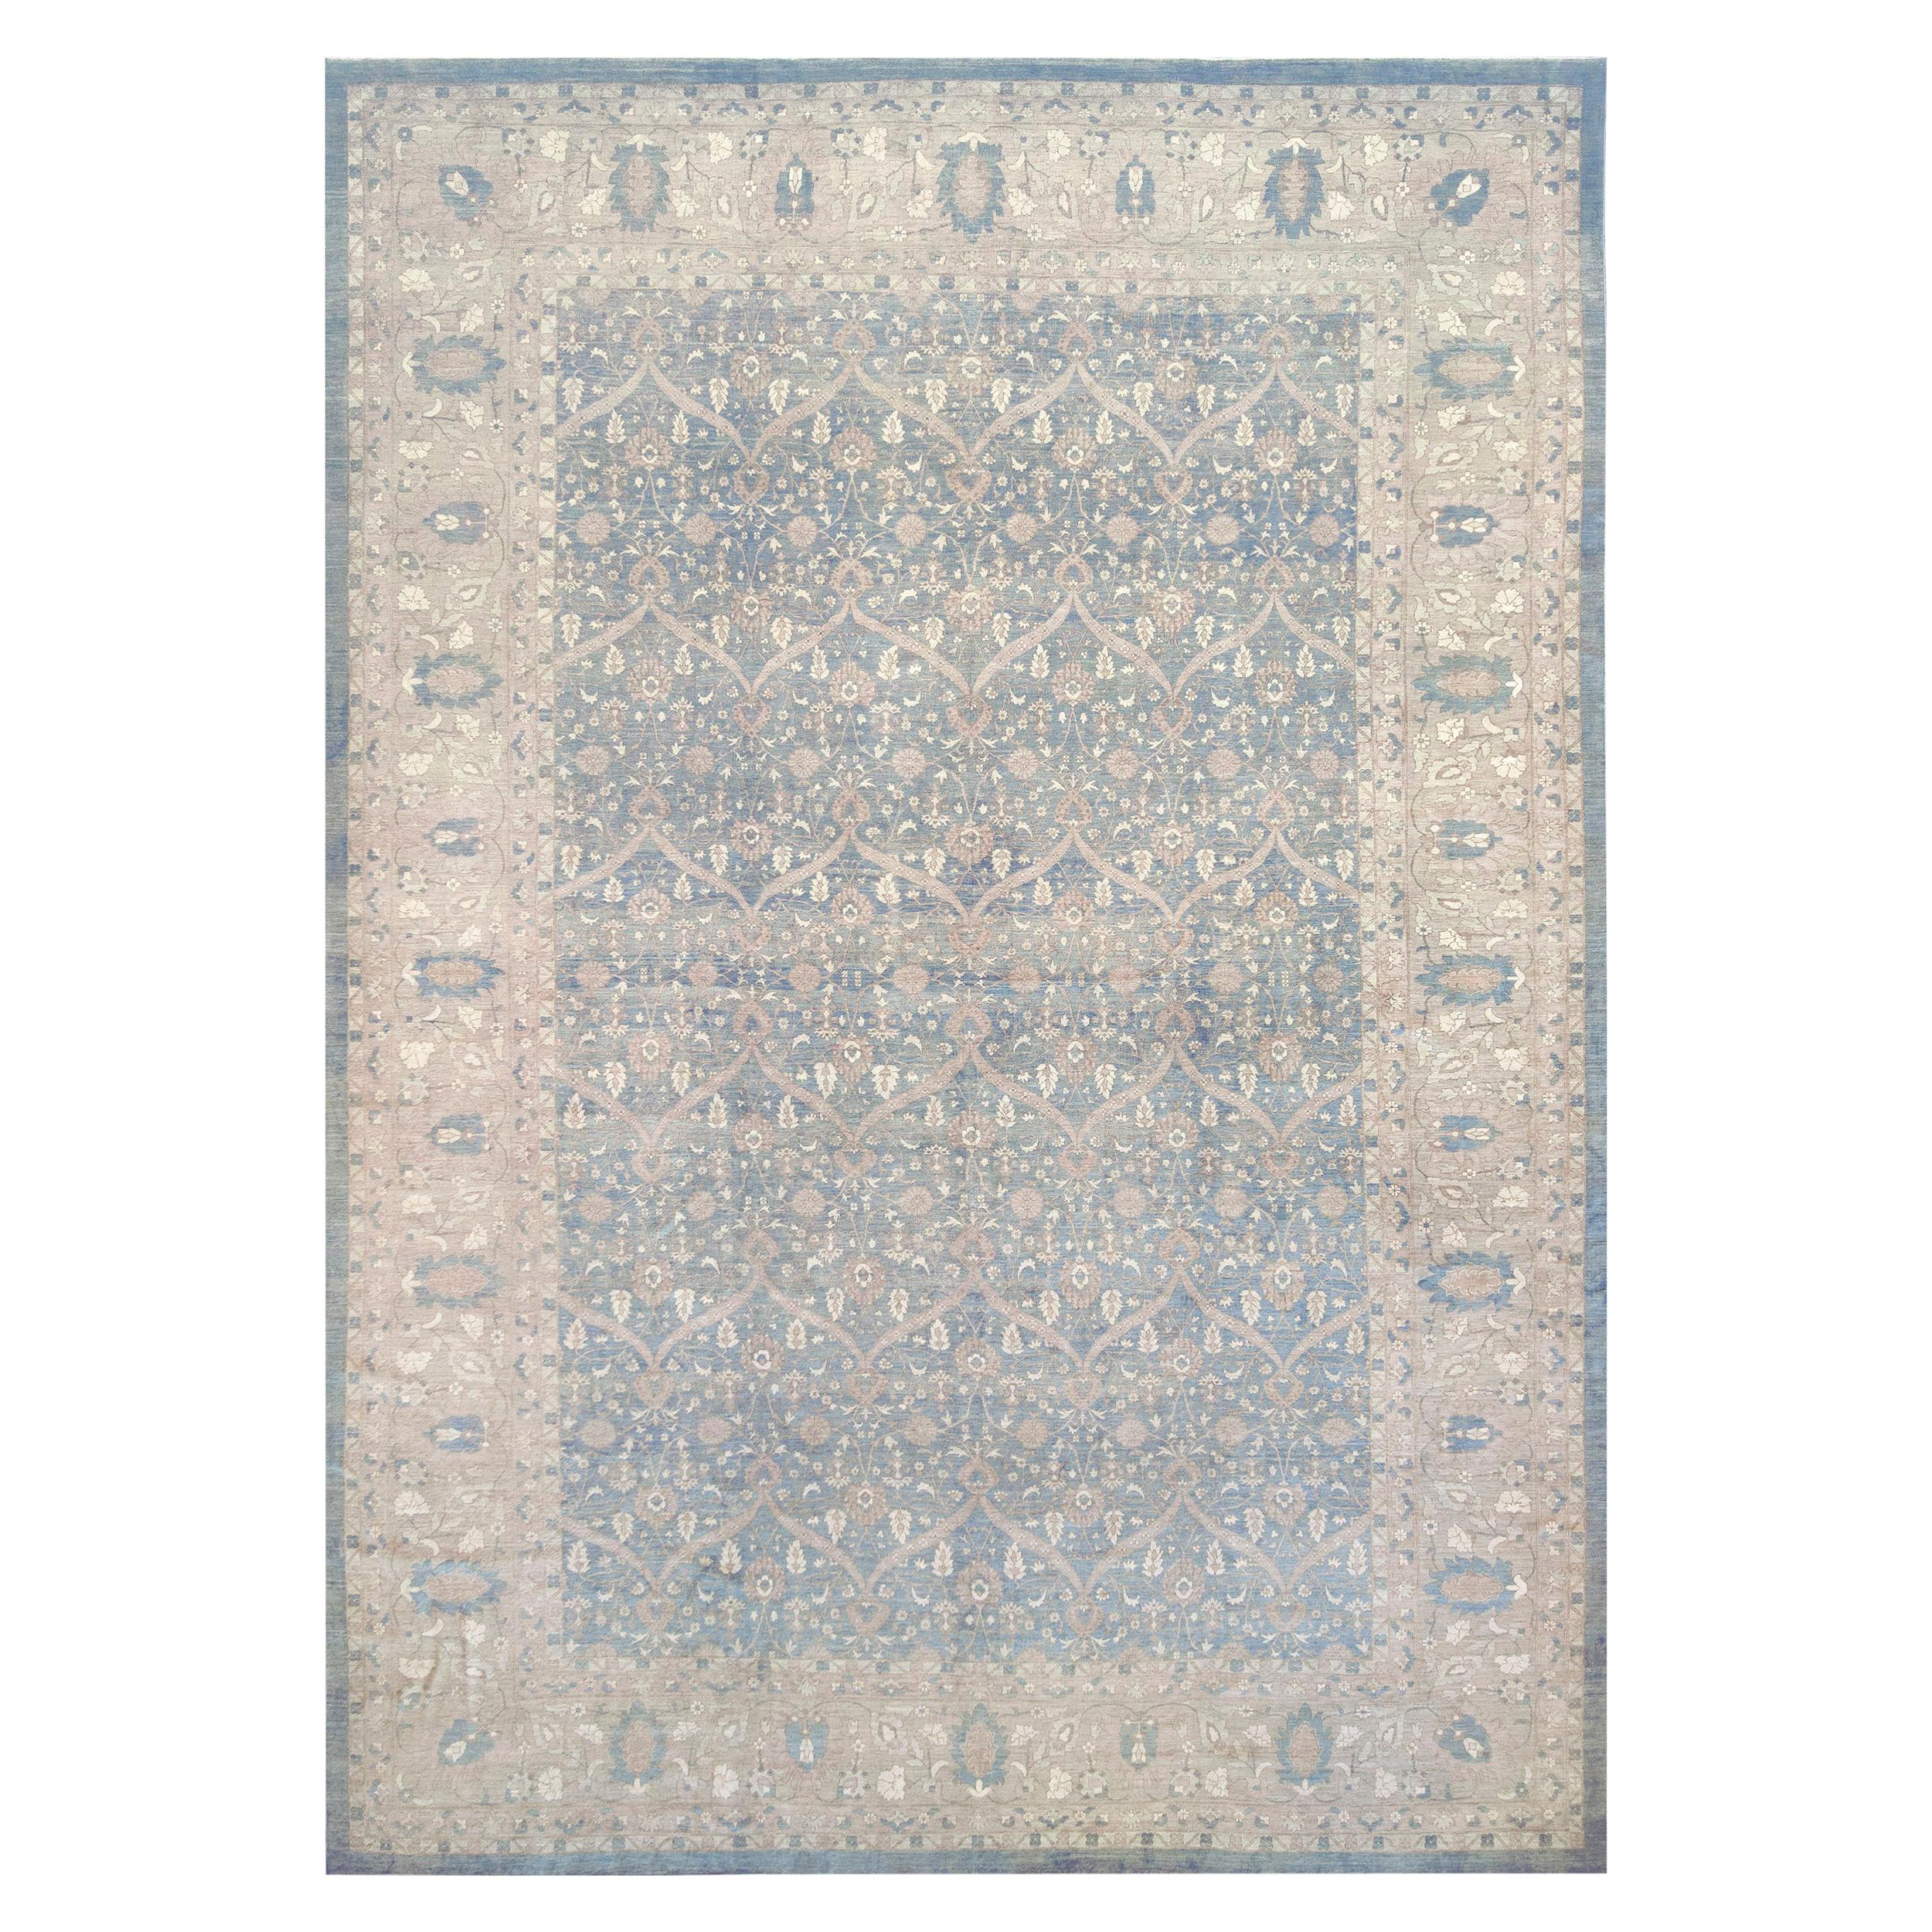 Handwoven Tabriz Style Wool Rug For Sale